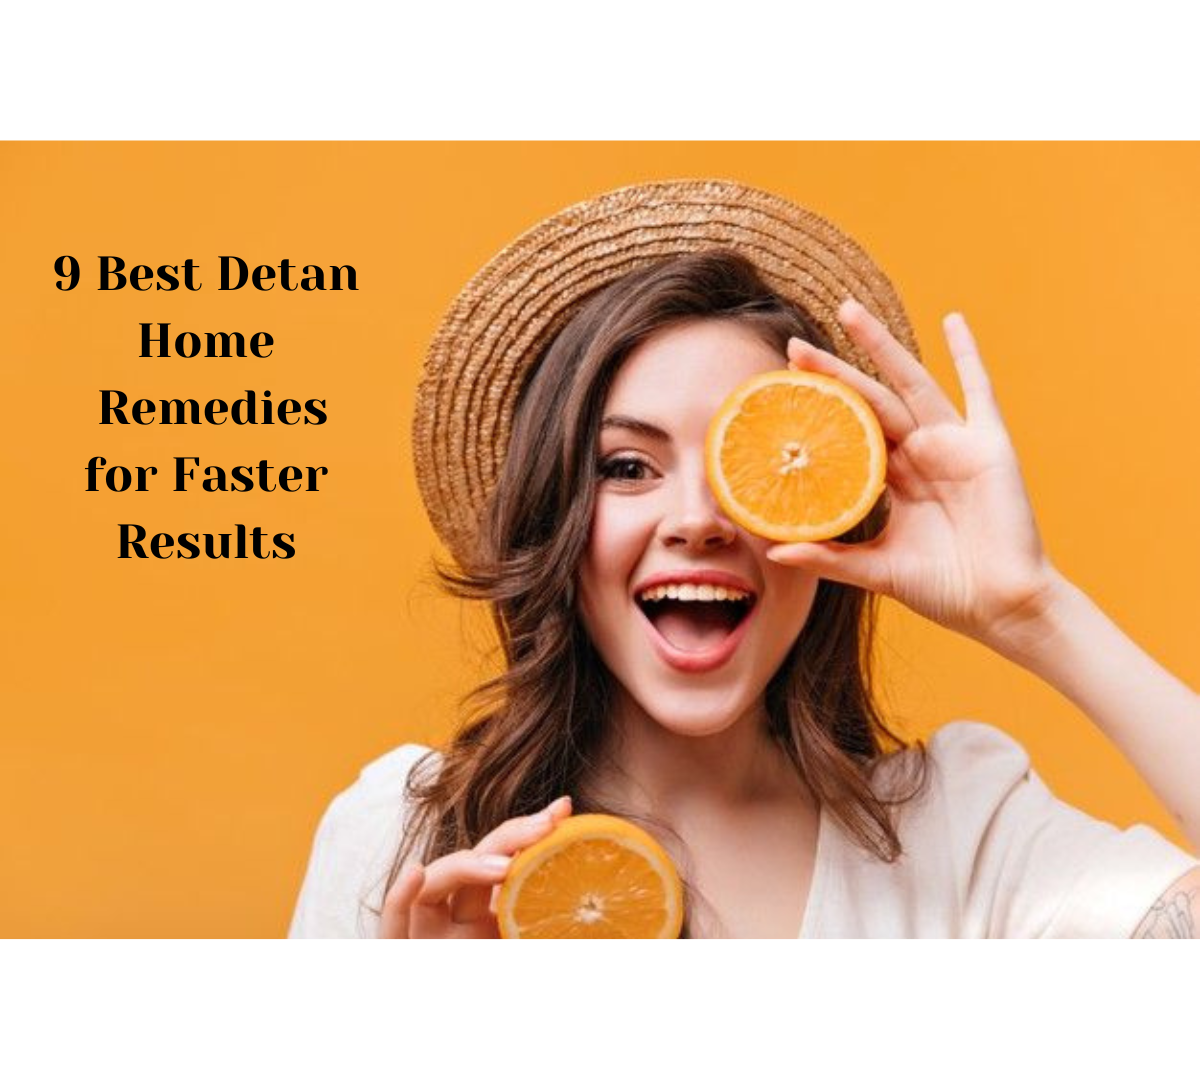 9 Best Detan Home Remedies for Faster Results